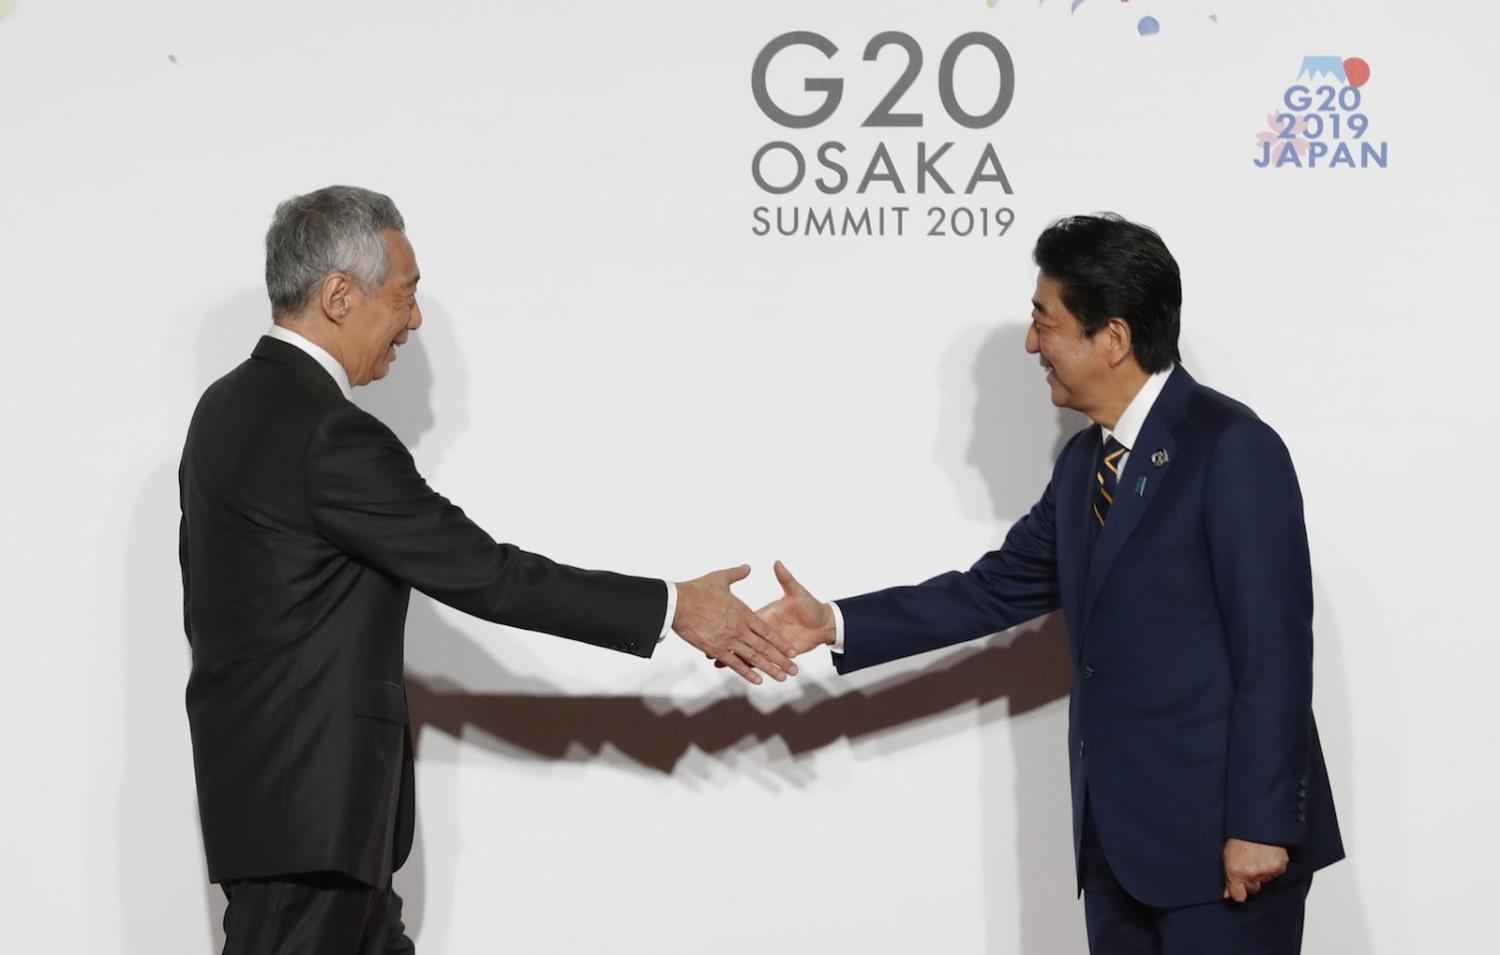 Singapore PM Lee Hsien Loong (L) is welcomed by Japanese PM Shinzo Abe at the G20 summit, June 2019 in Osaka, Japan. (Photo: Kim Kyung-Hoon via Getty)